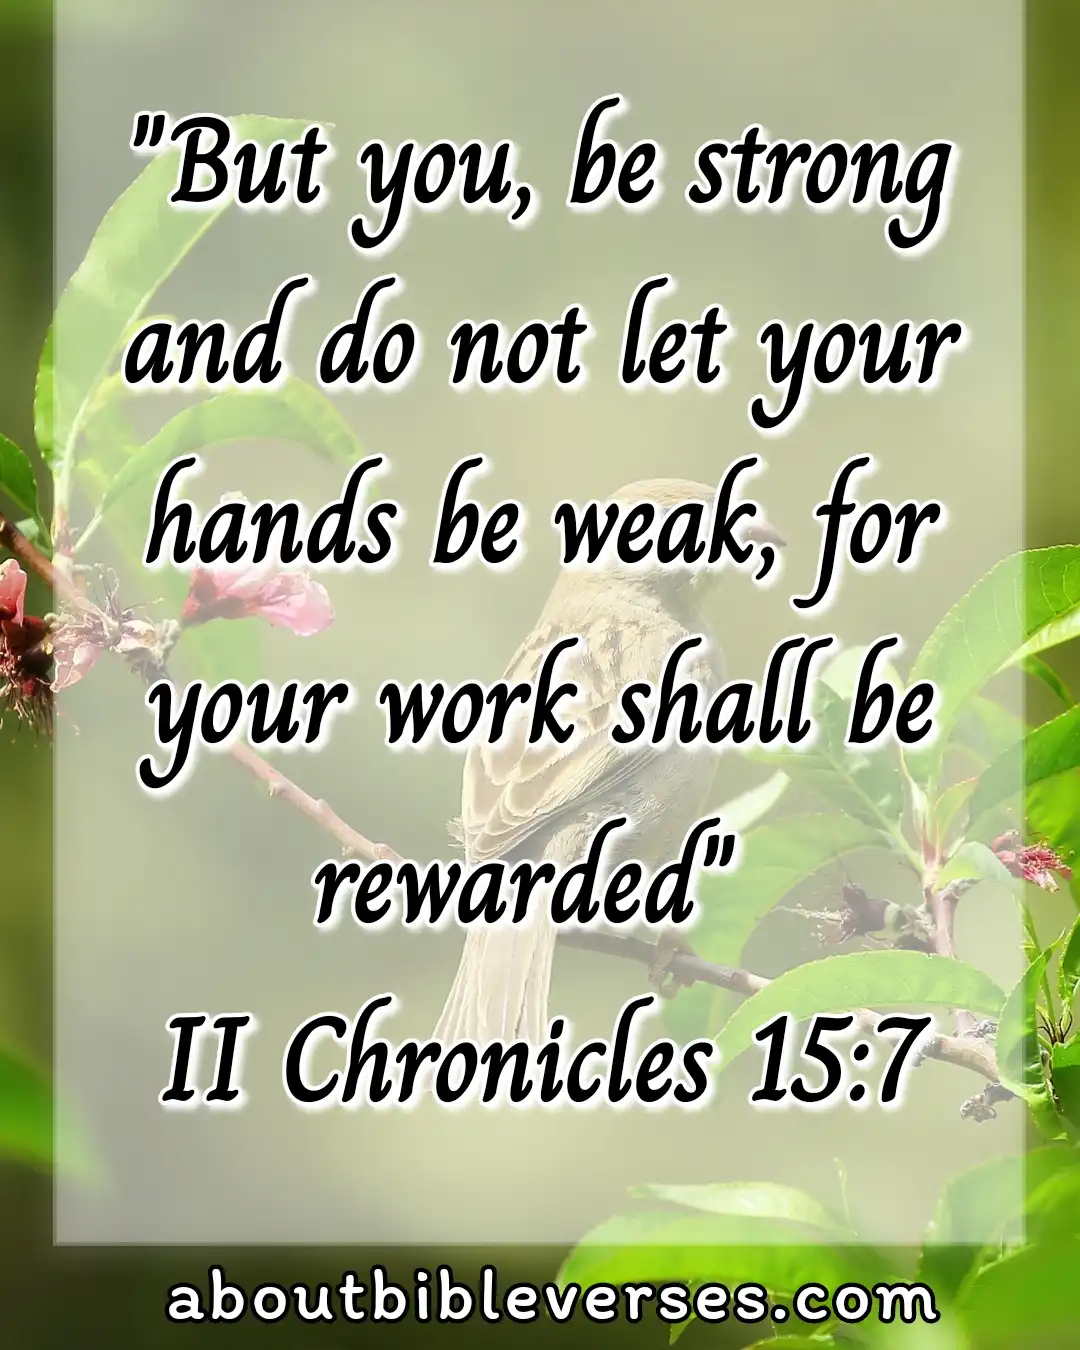 today Bible Verse (2 Chronicles 15:7)